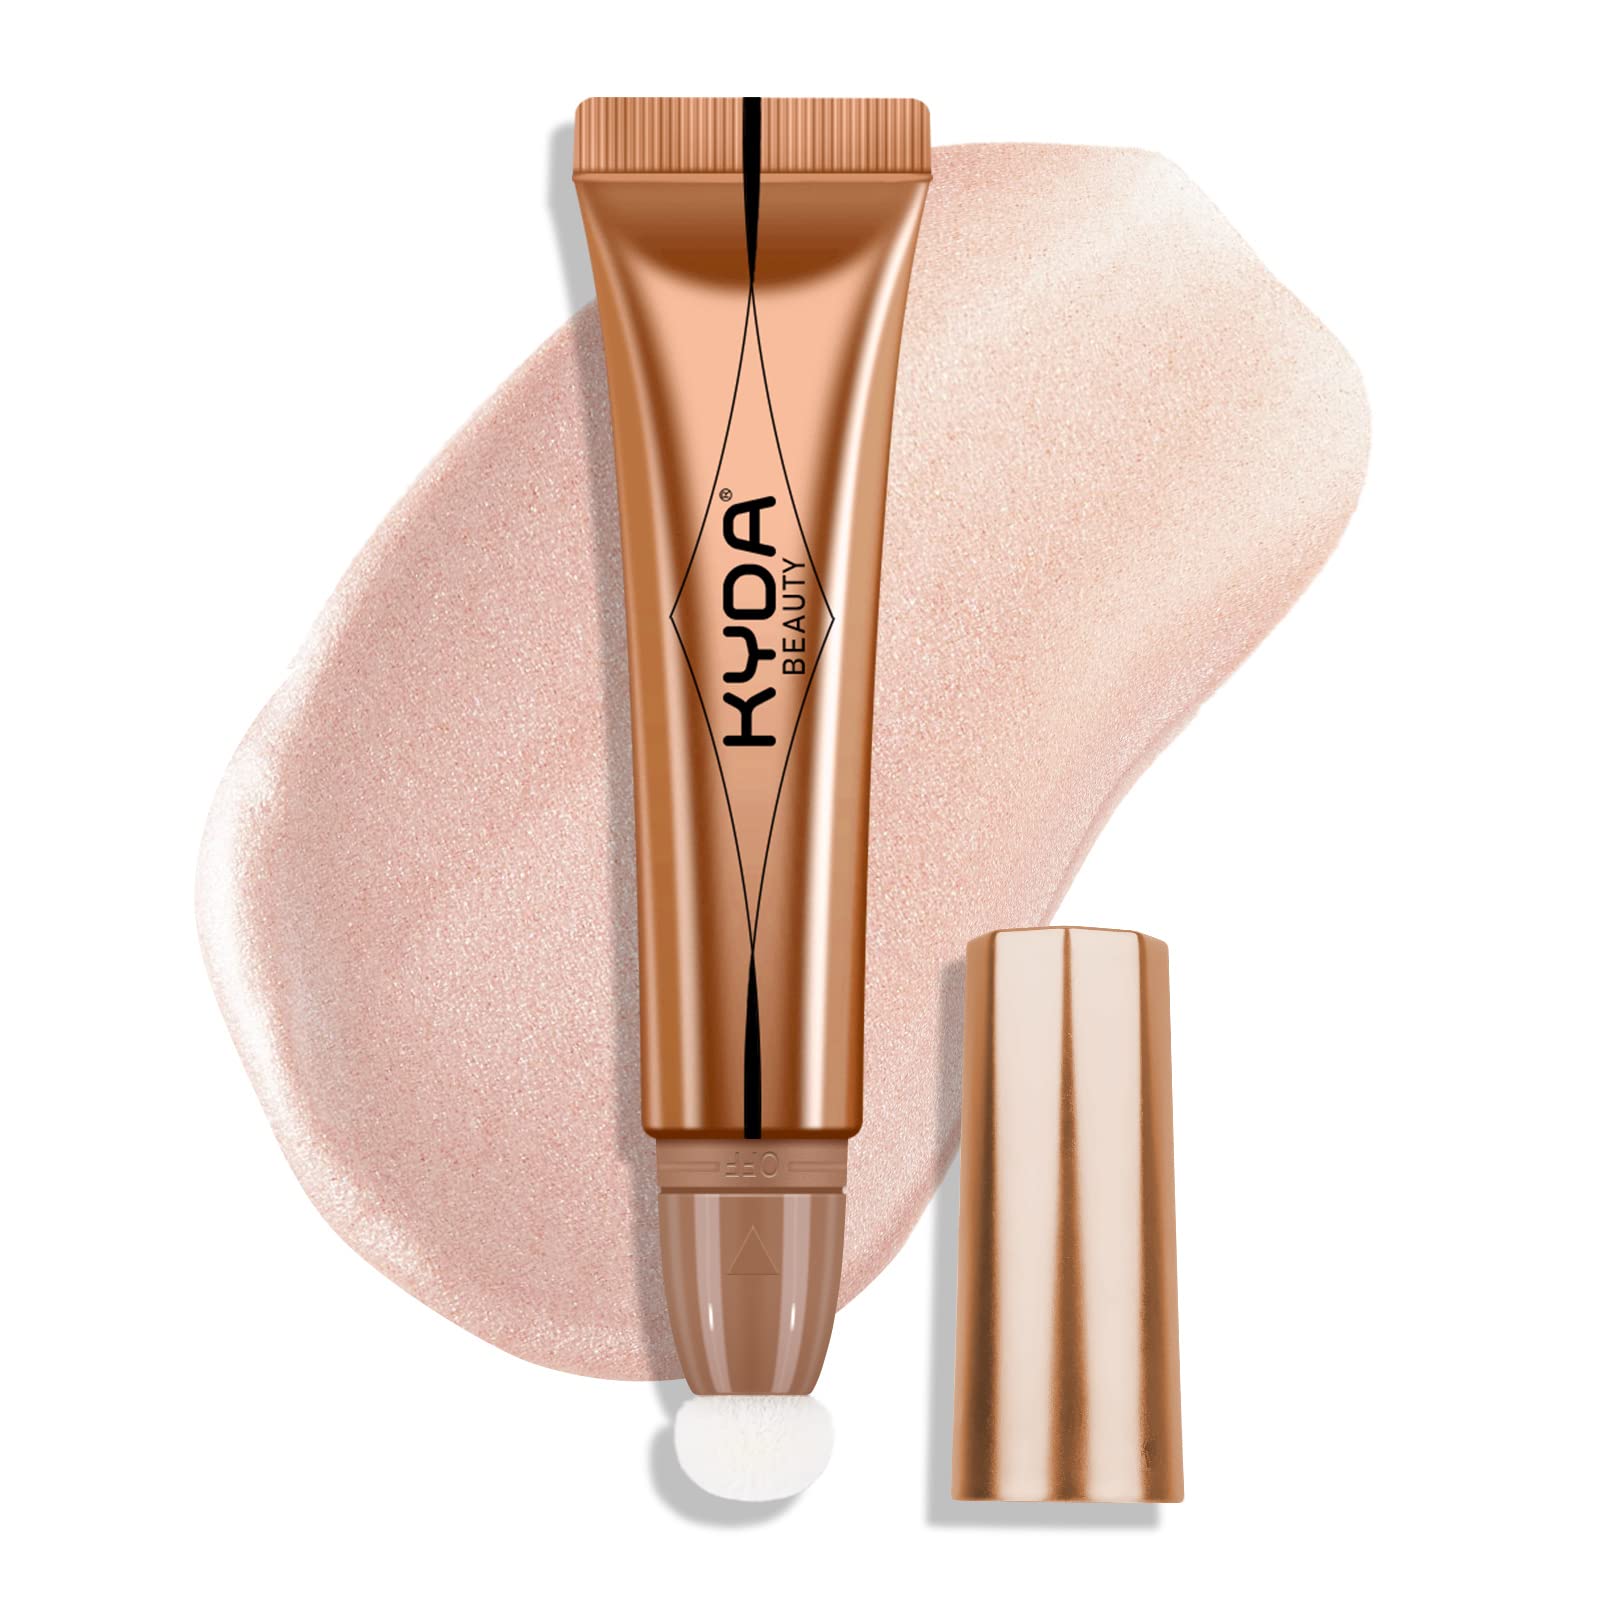 KYDA Highlighter Beauty Wand, Liquid Face Illuminator with Cushion Applicator, Natural Glossy Finish Smooth Creamy Texture, Highlighter Bronzer Makeup, Lightweight Breathable, by Ownest Beauty-#Spotlight Highlighter